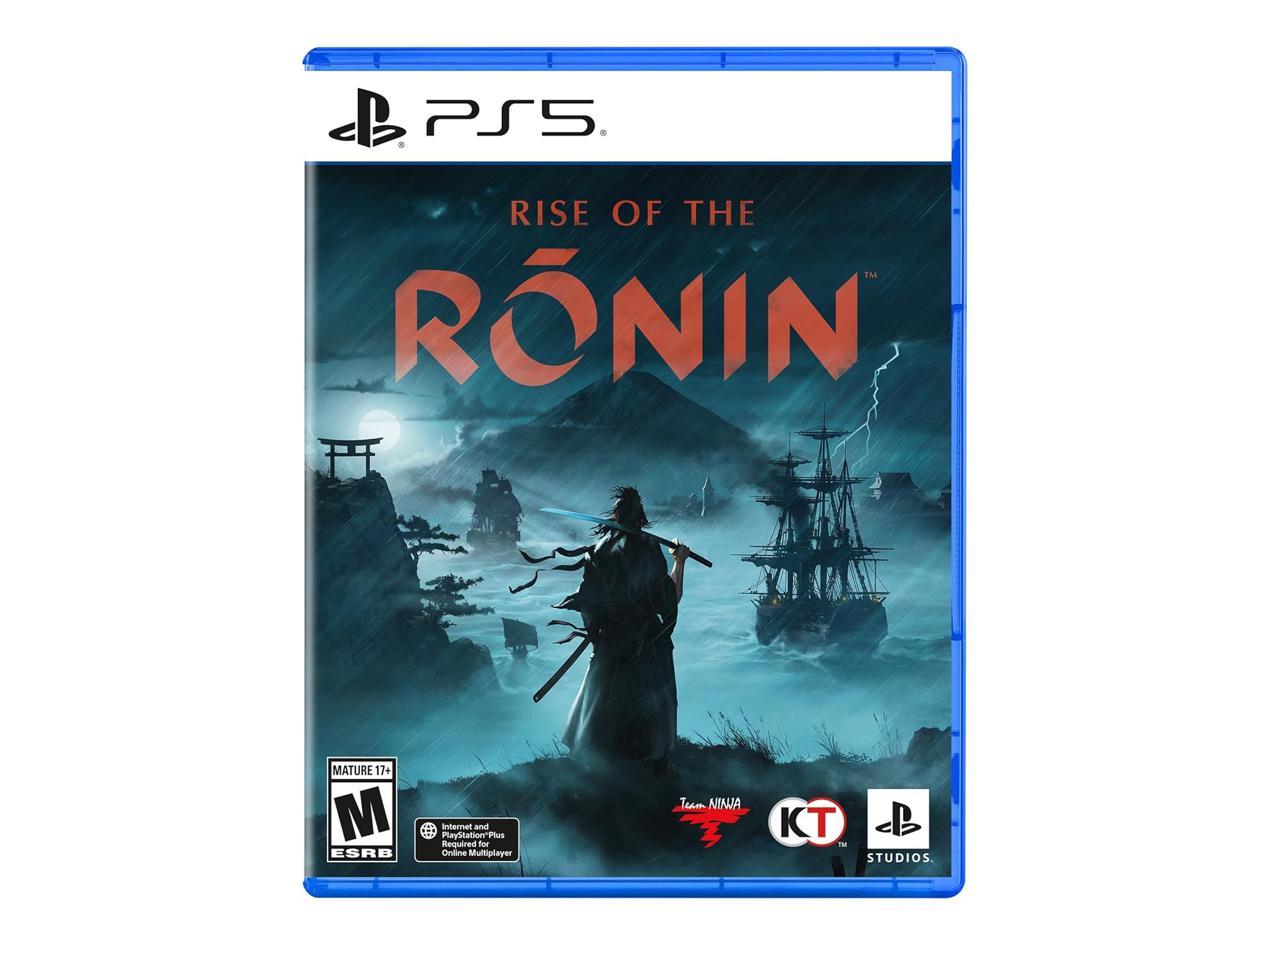 Sony Rise of the Ronin - PlayStation 5